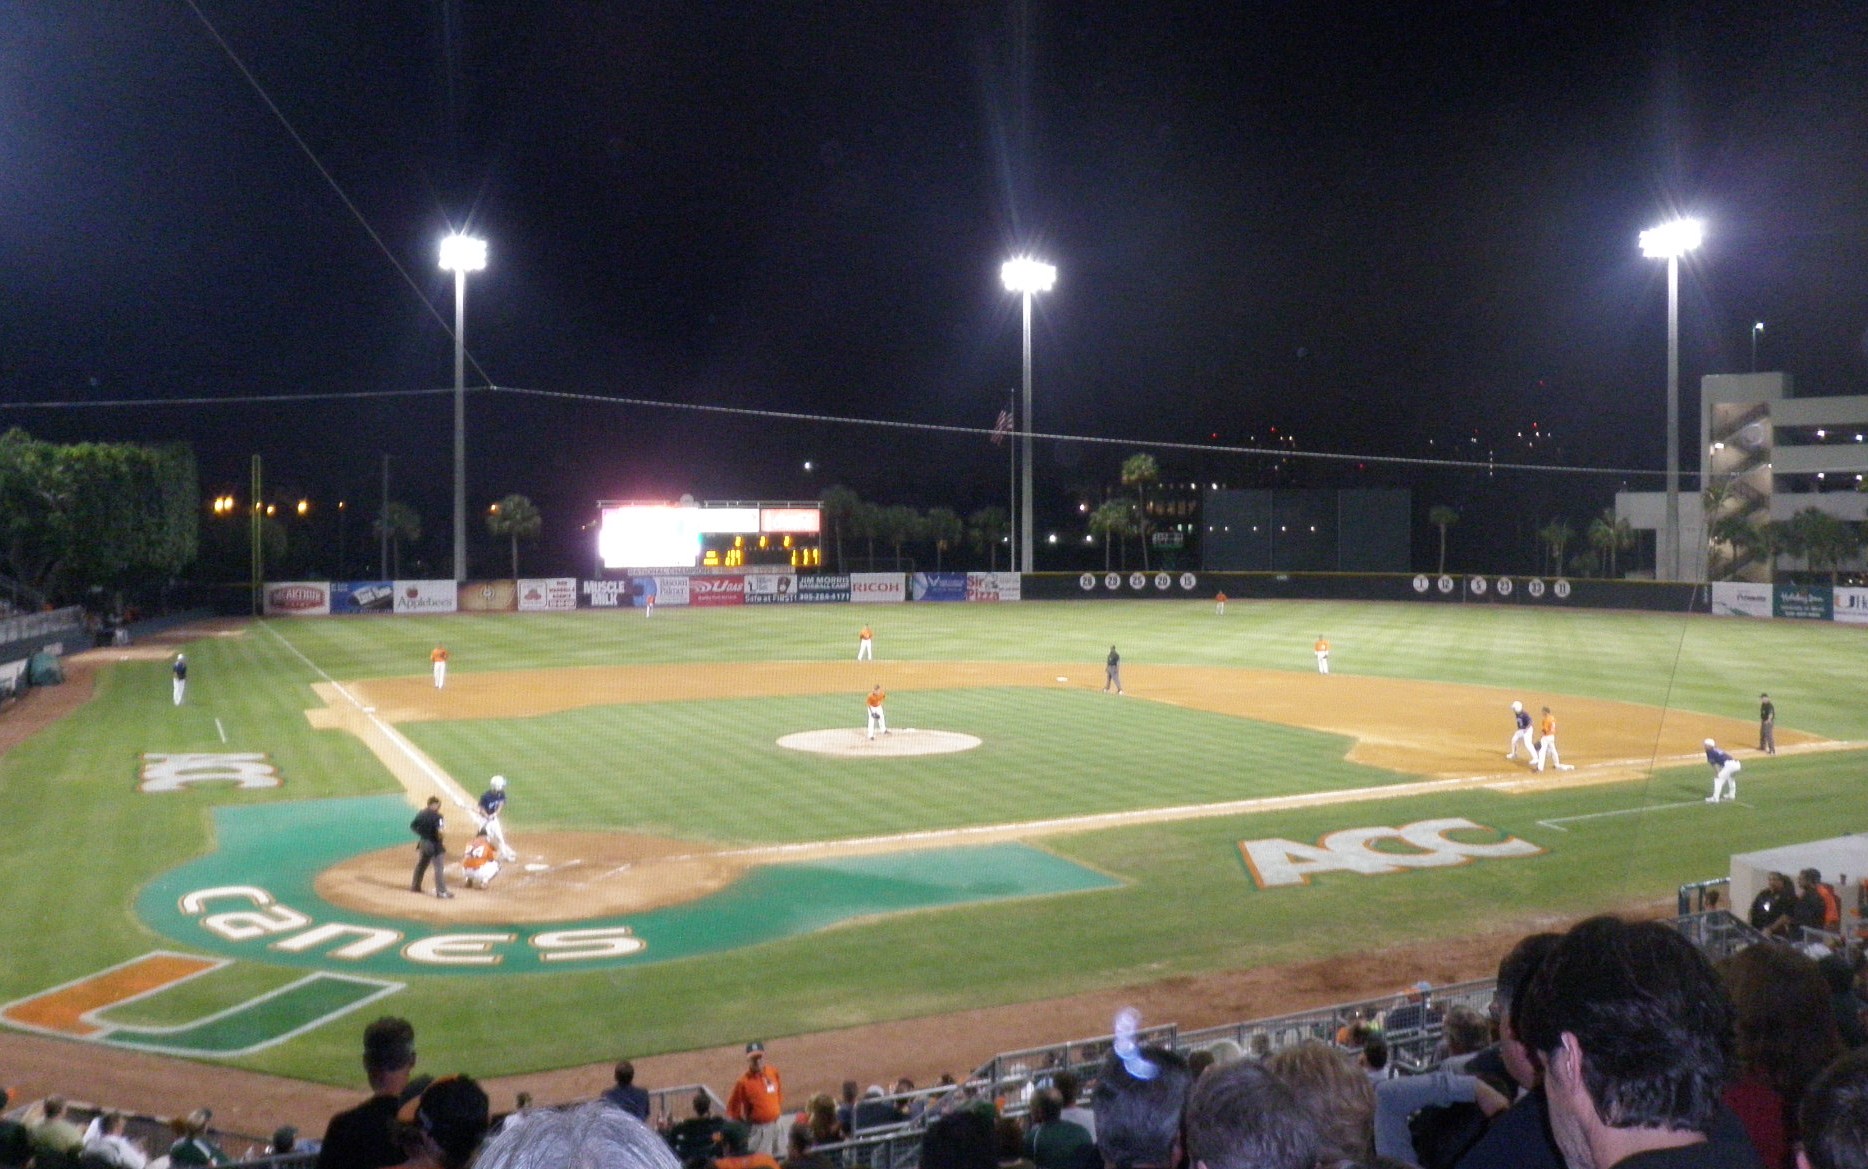 Smart Family: College Baseball Game, a Great Family Night Out!